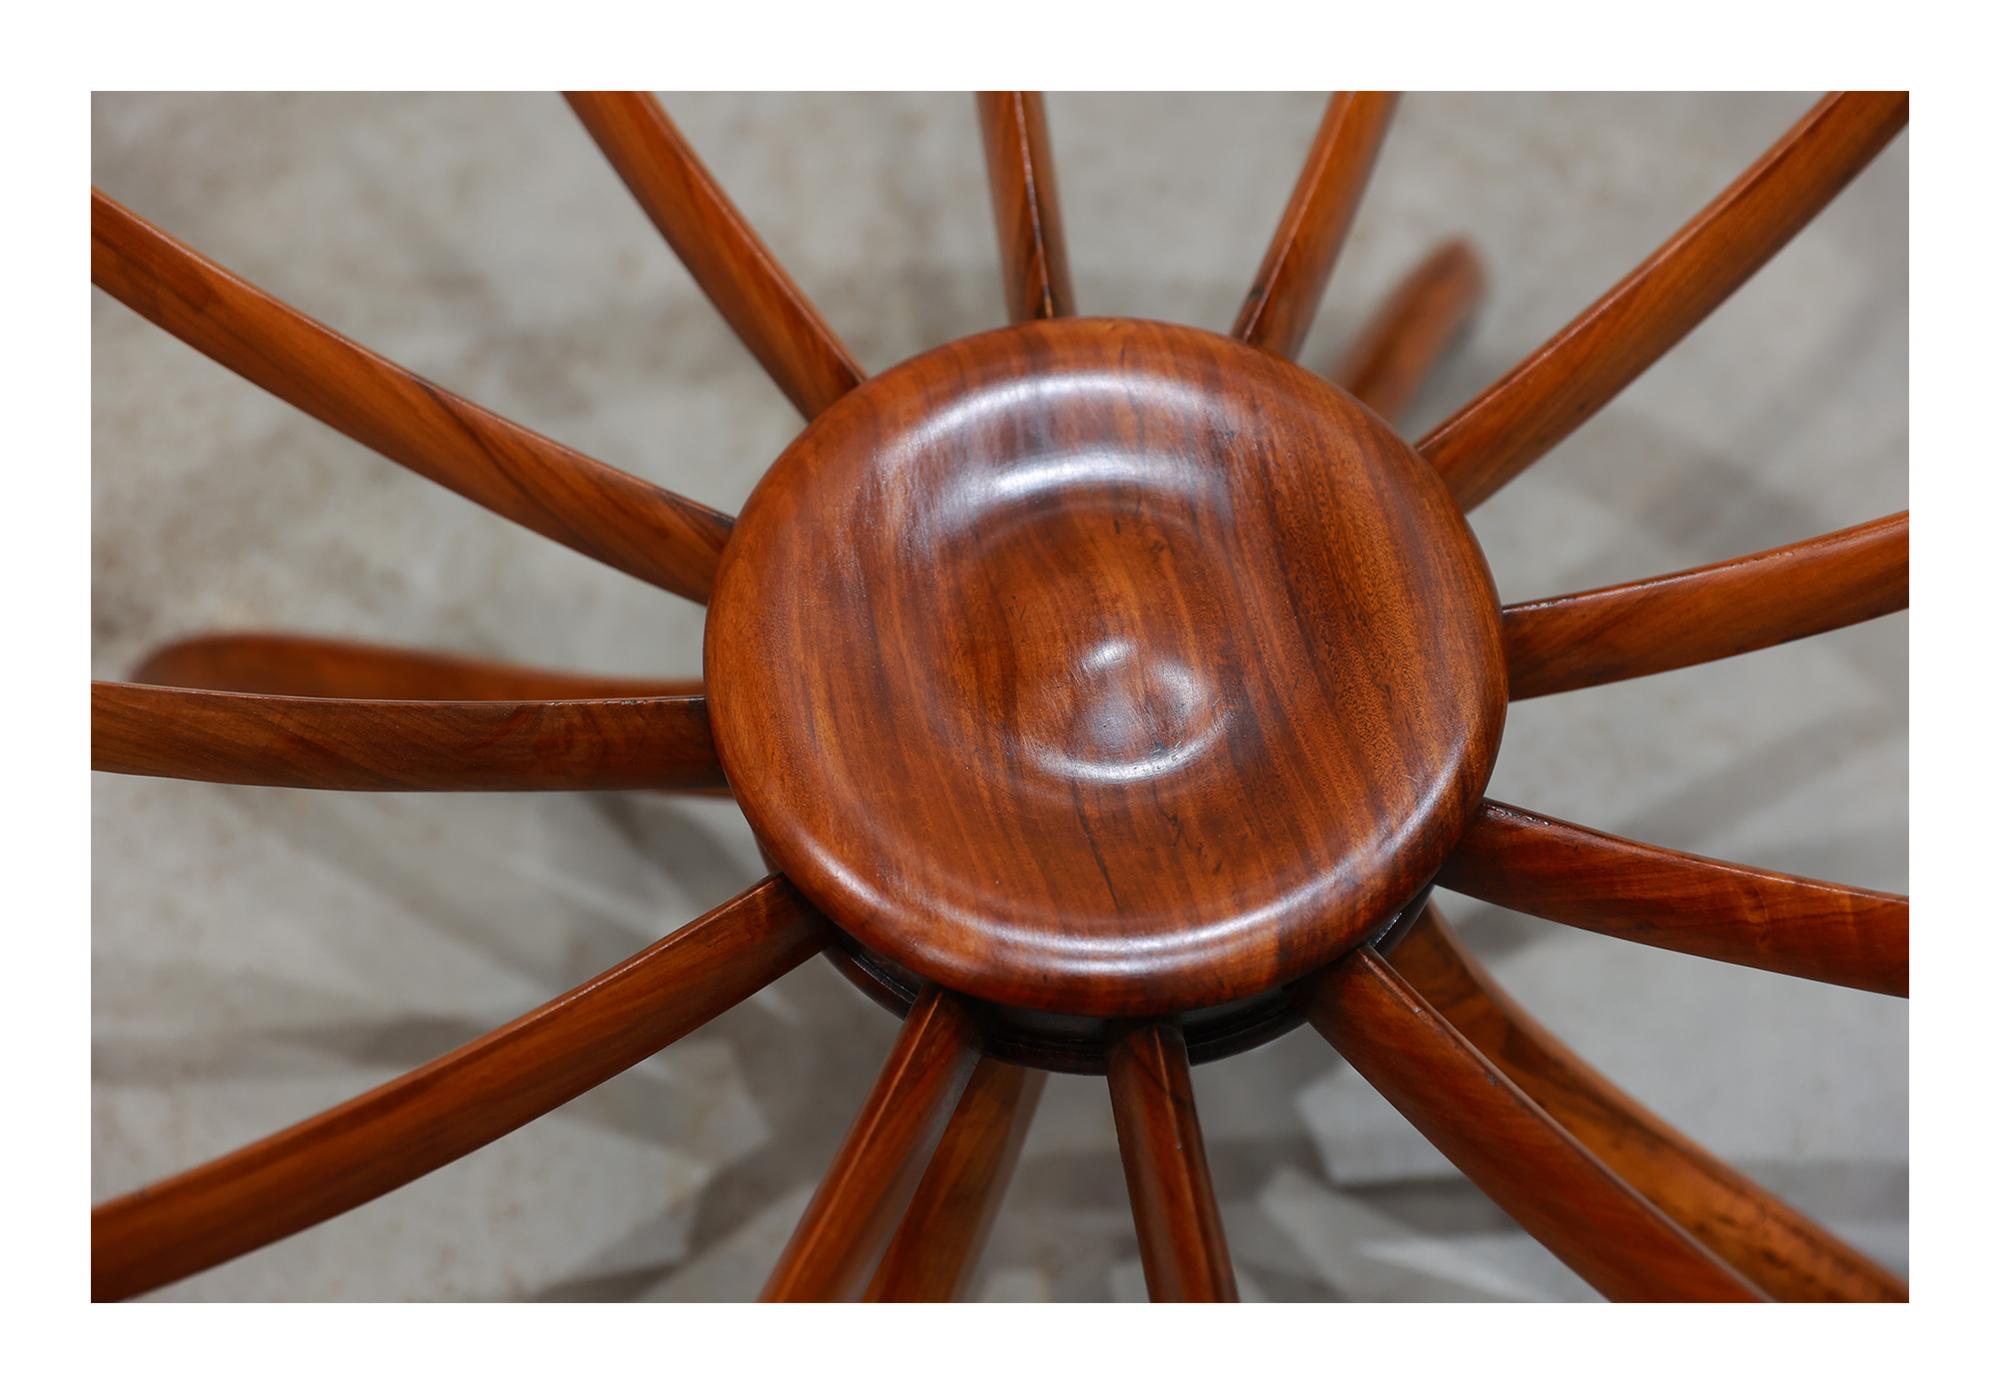 Woodwork Brazilian Modern Coffee Table in Hardwood by Giuseppe Scapinelli, Brazil, 1950s For Sale